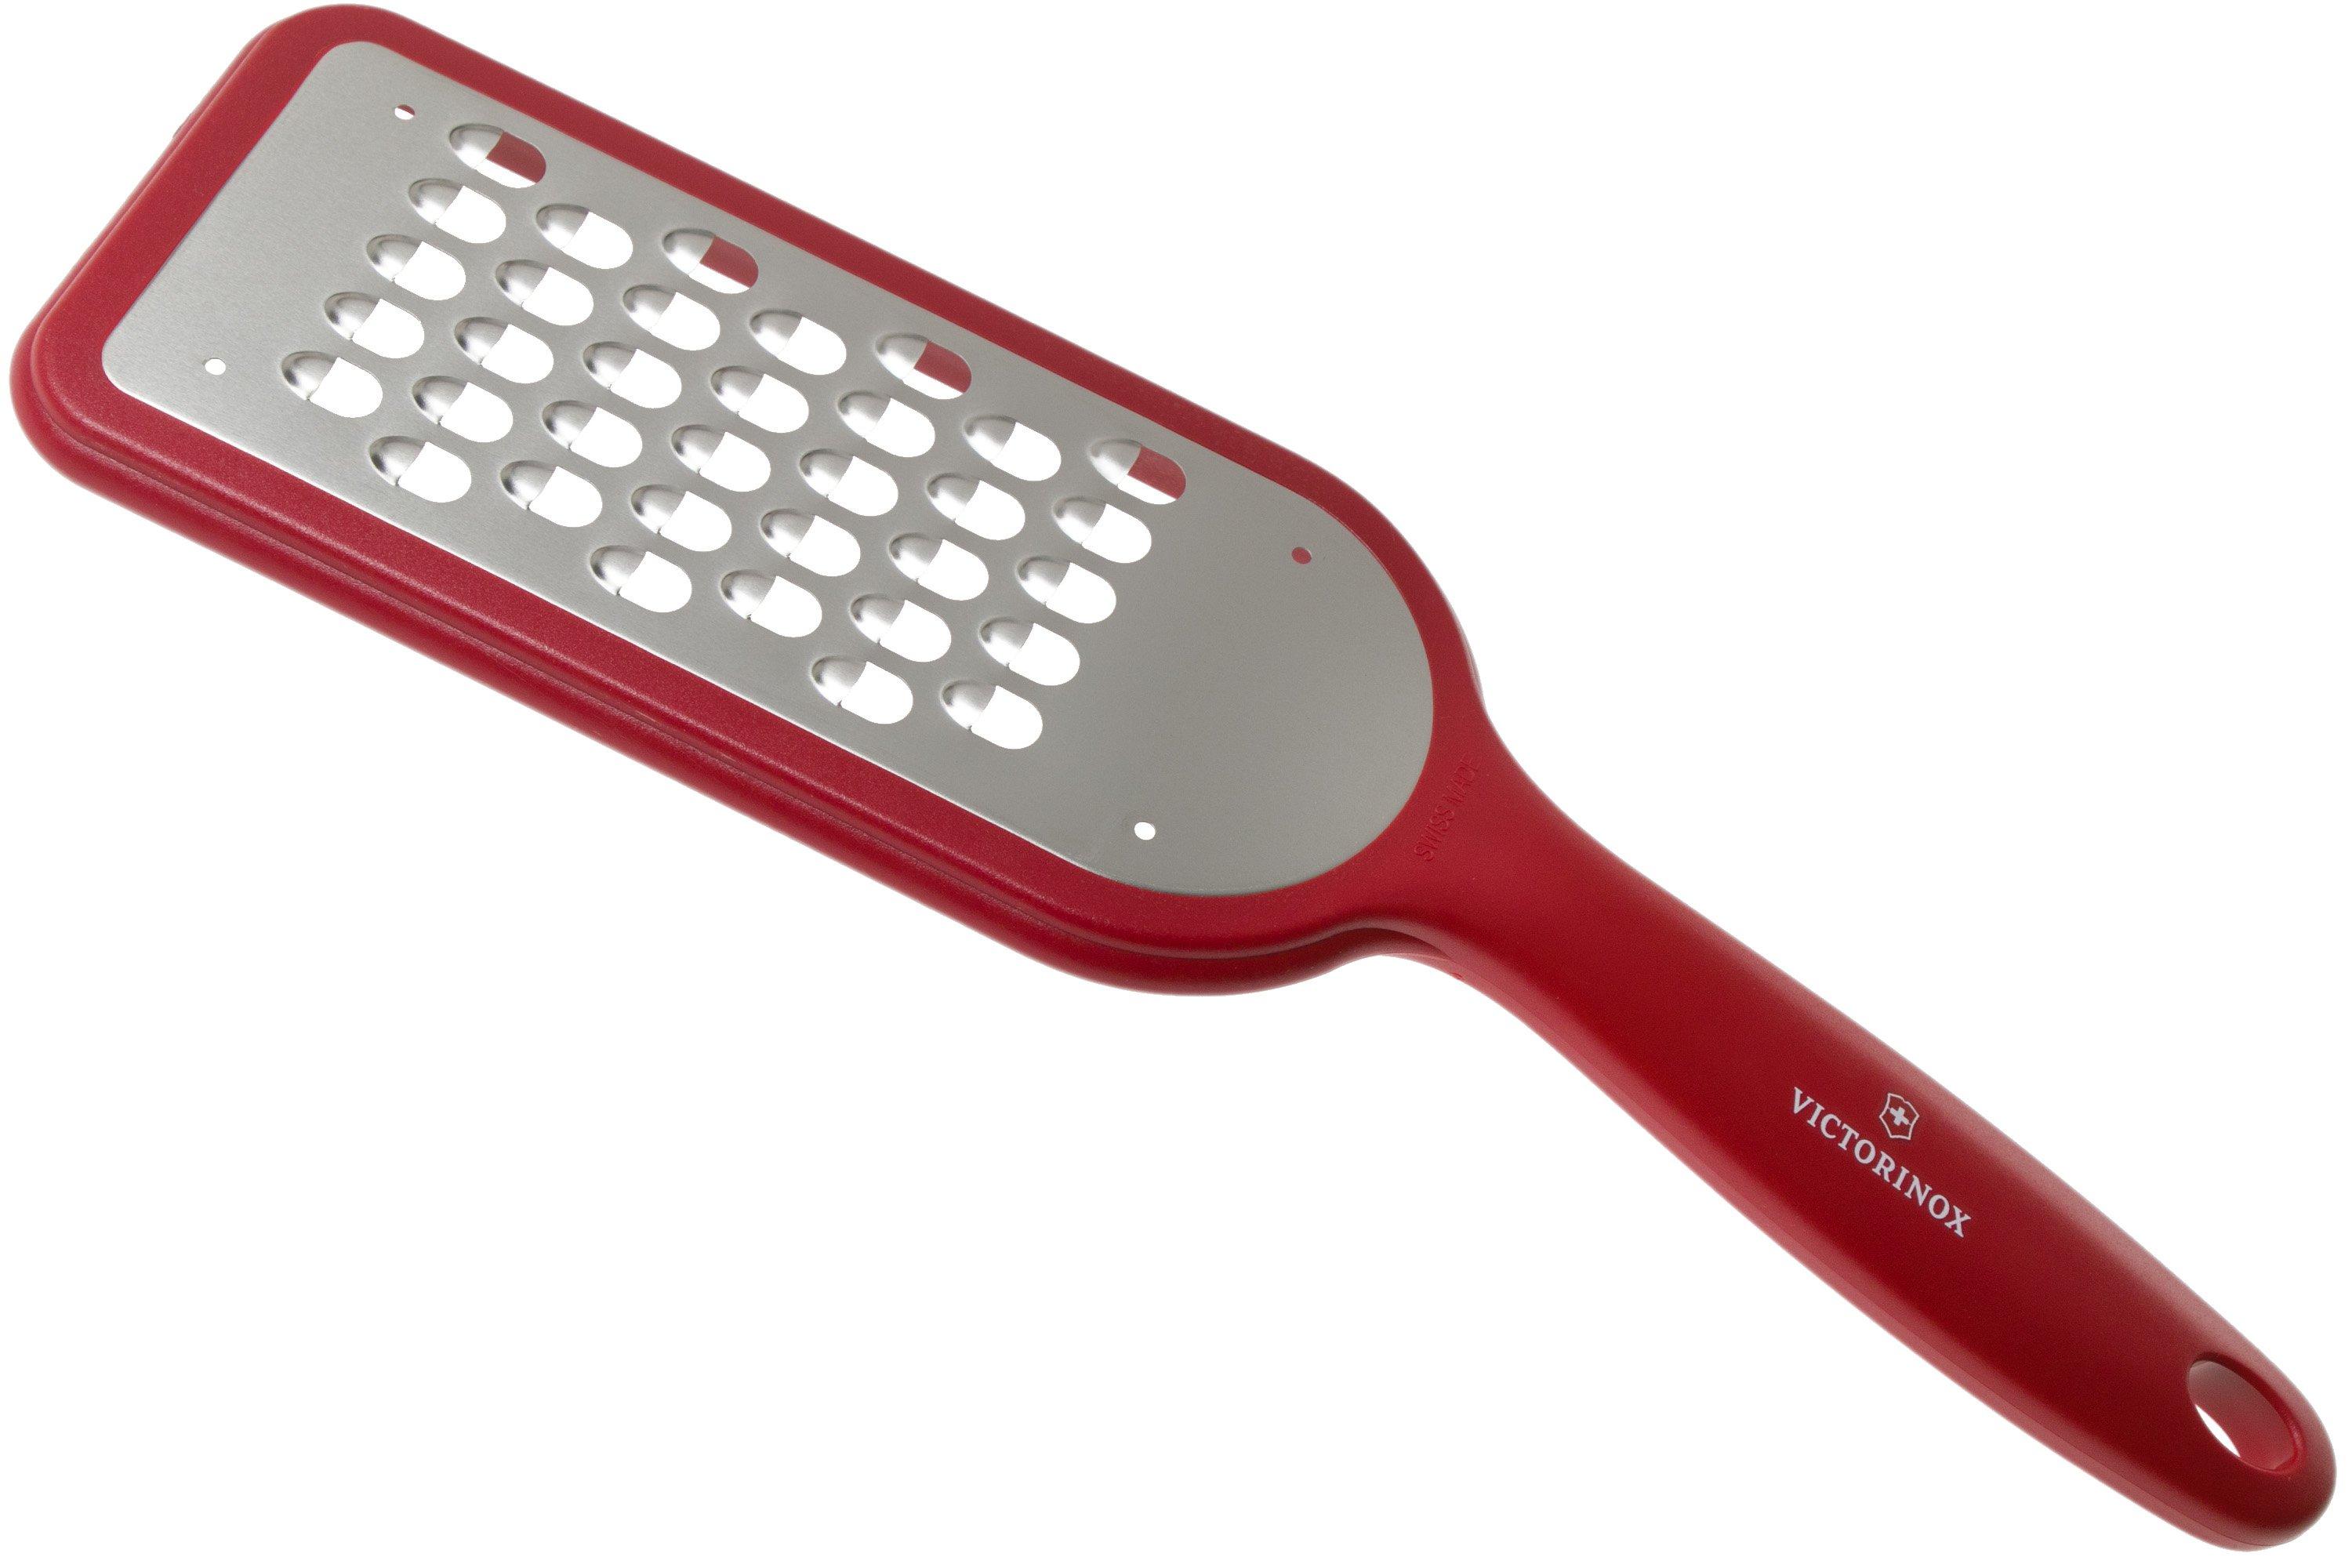 Victorinox cheese grater fine, 7.6076  Advantageously shopping at